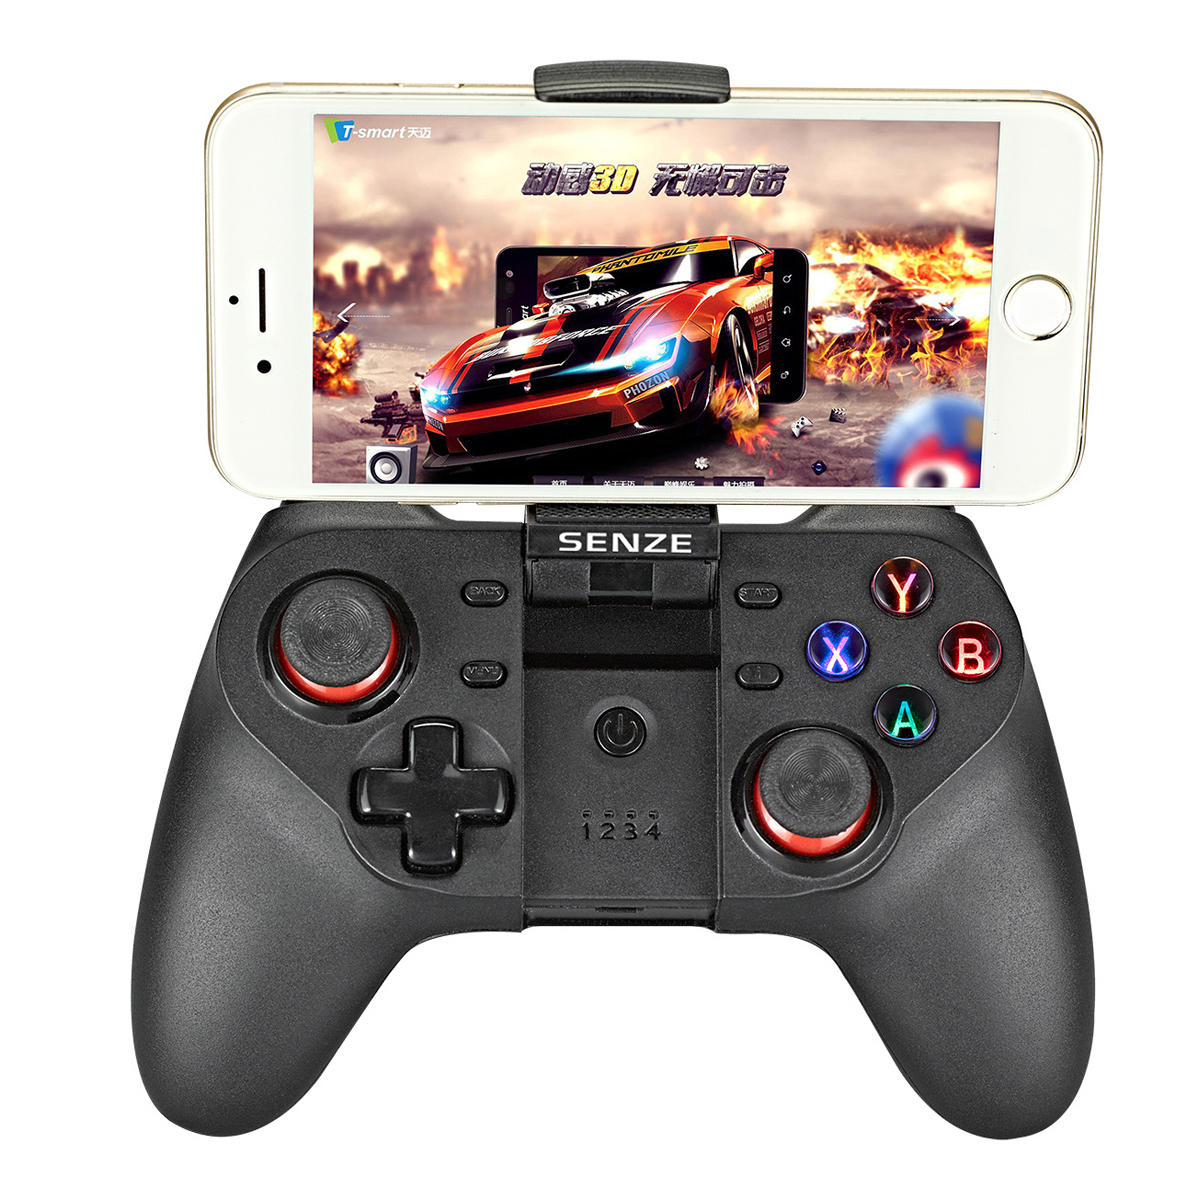 

Senze SZ-A1019 bluetooth Gamepad with Bracket Game Controller for iOS Android Mobile Phone TV Box PC Tablets Smart TV